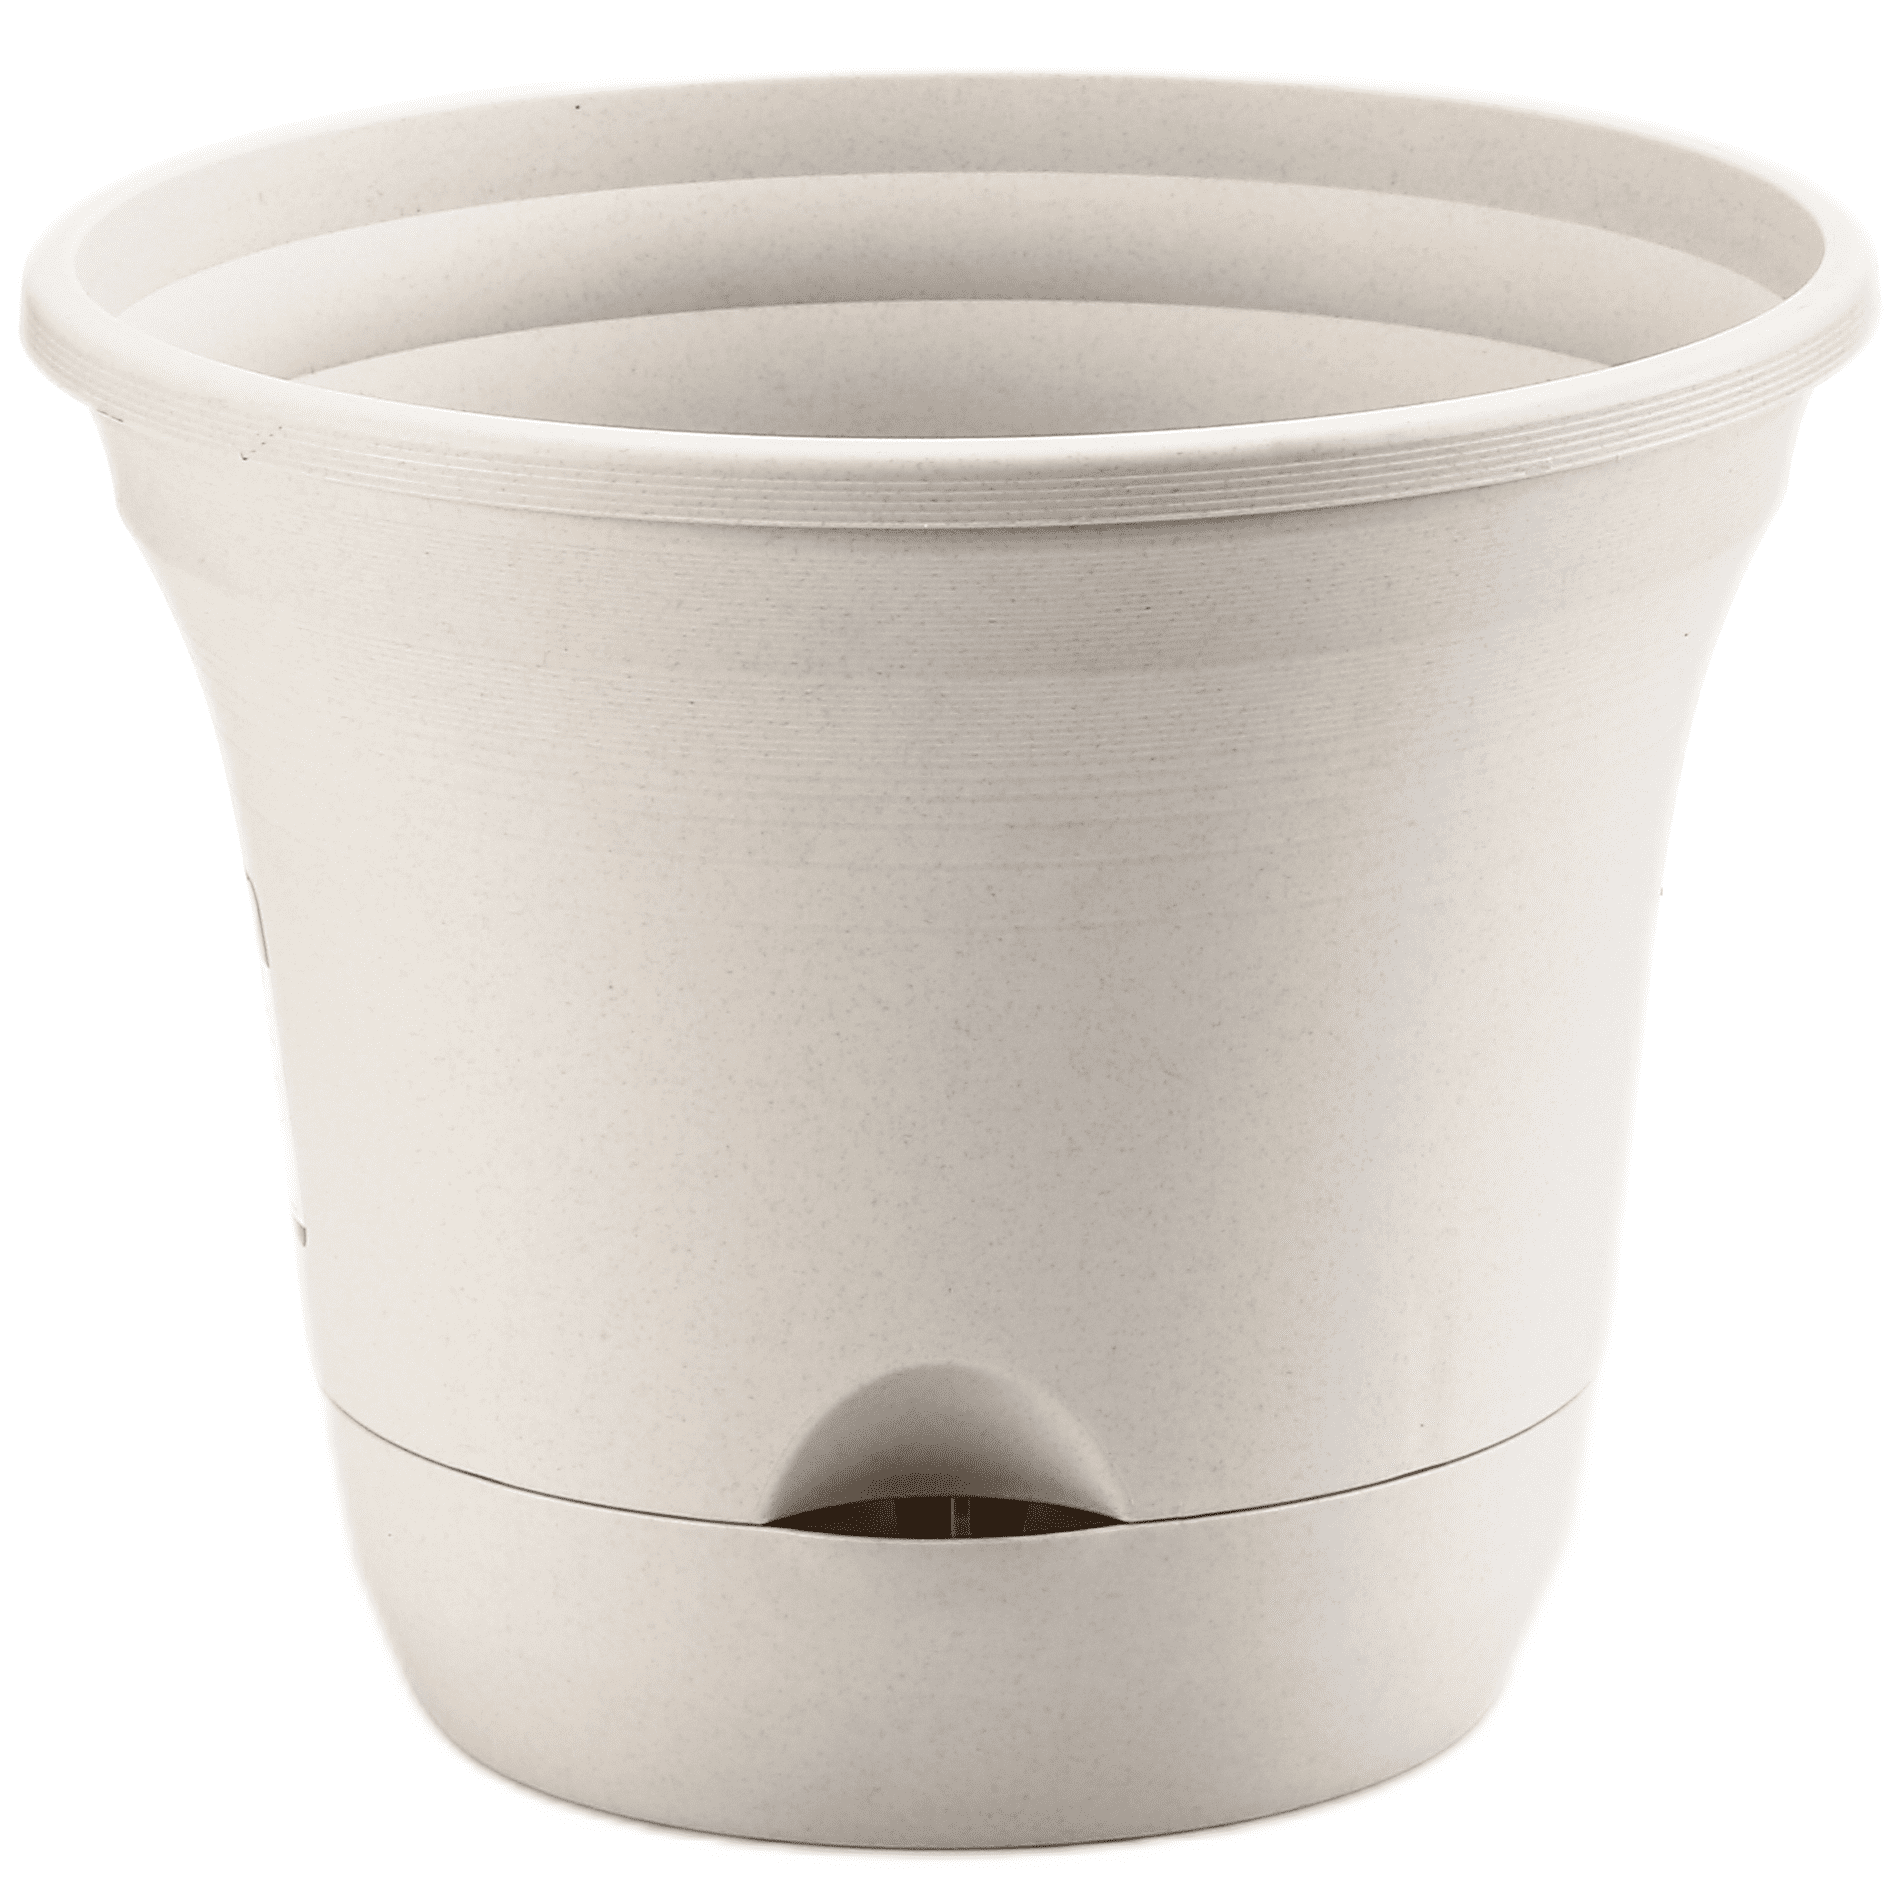 Olly & Rose Lazy Planters - Self Watering Plant Pot Ivory Plastic Planter  Self Watering Indoor & Outdoor (2 x 8) 